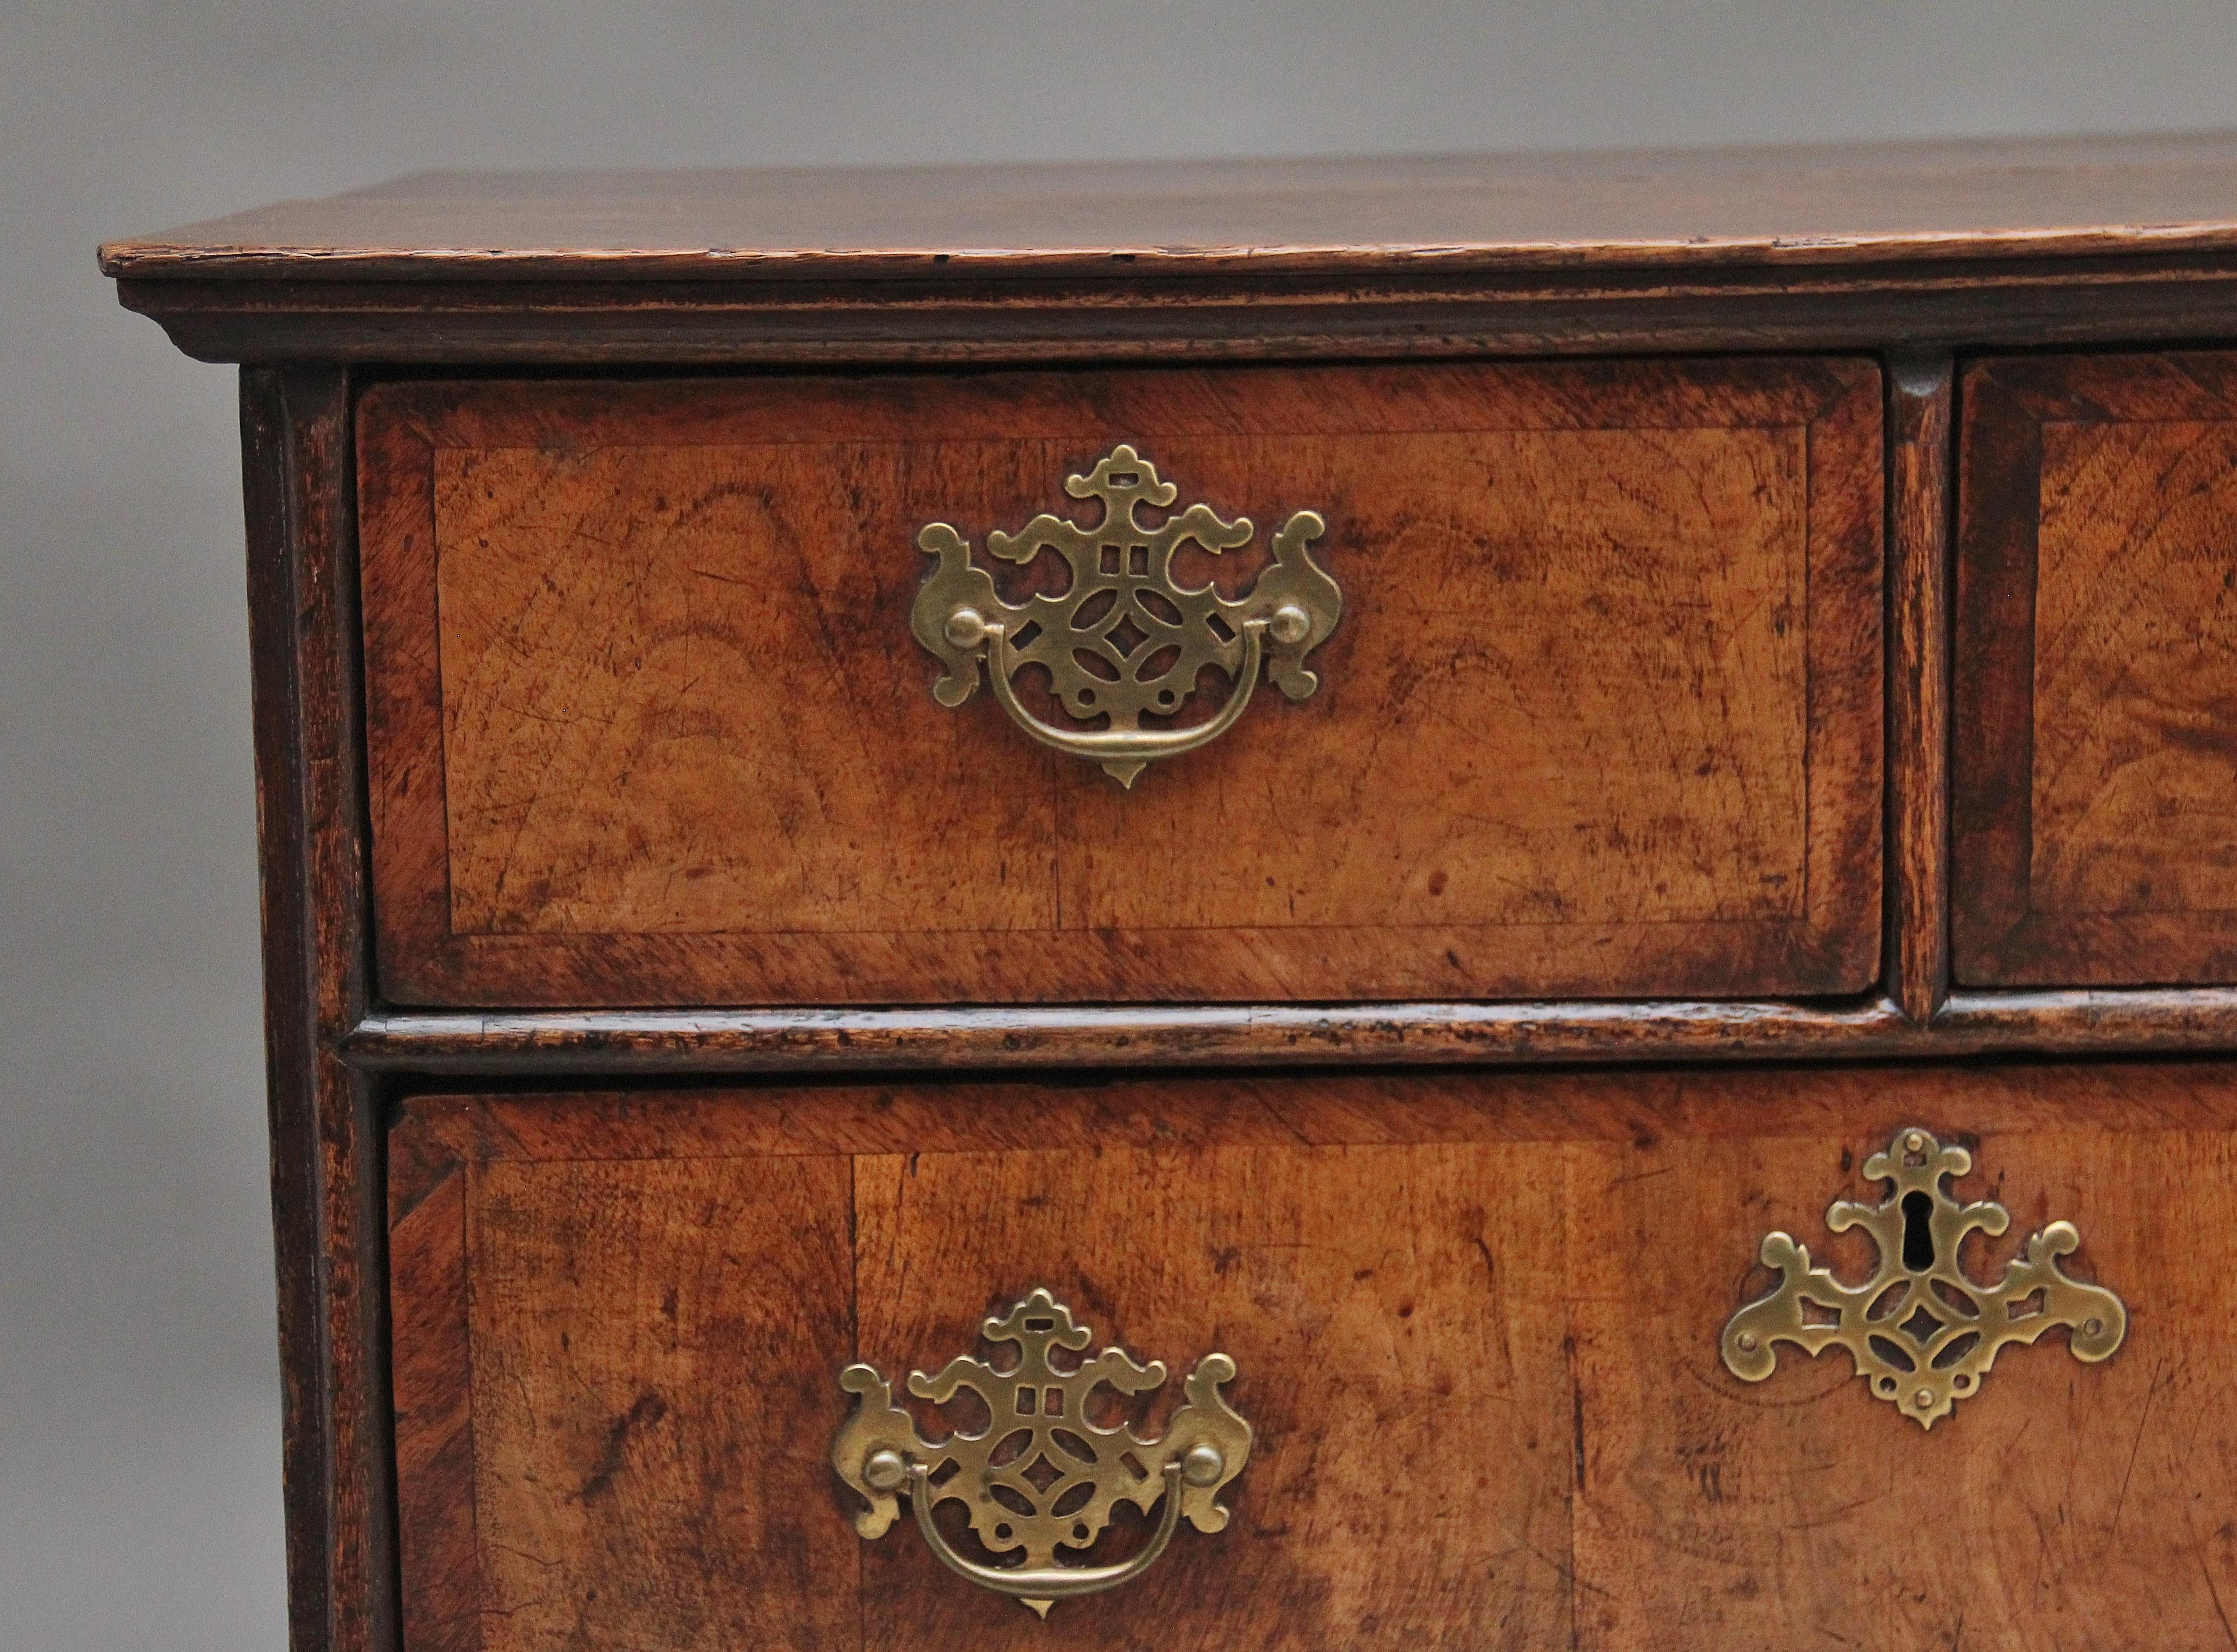 Early 18th Century walnut chest of drawers, having a nice figured top above a selection of two short over two long drawers with pierced brass plate handles and escutcheons, raised on bracket feet.  In very good condition and having lovely figuration